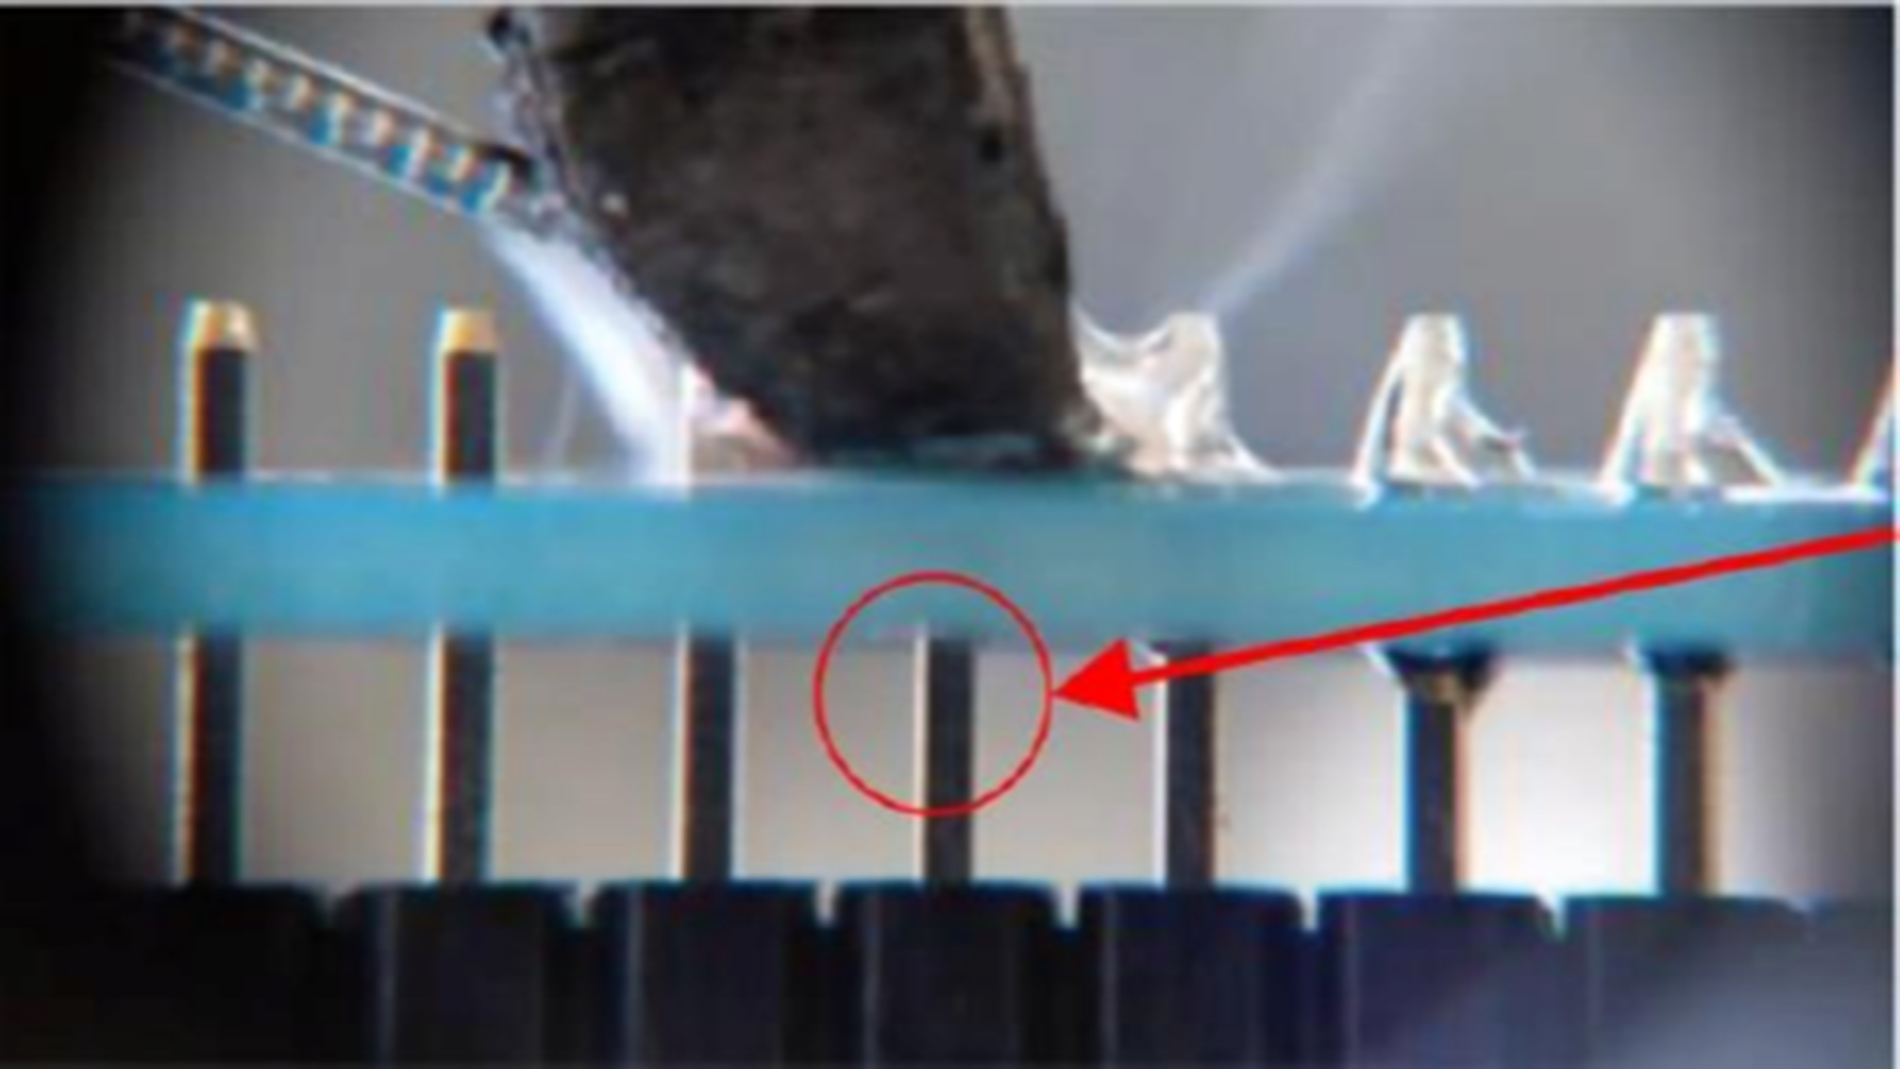 Drag soldering, use of a conventional solder wire